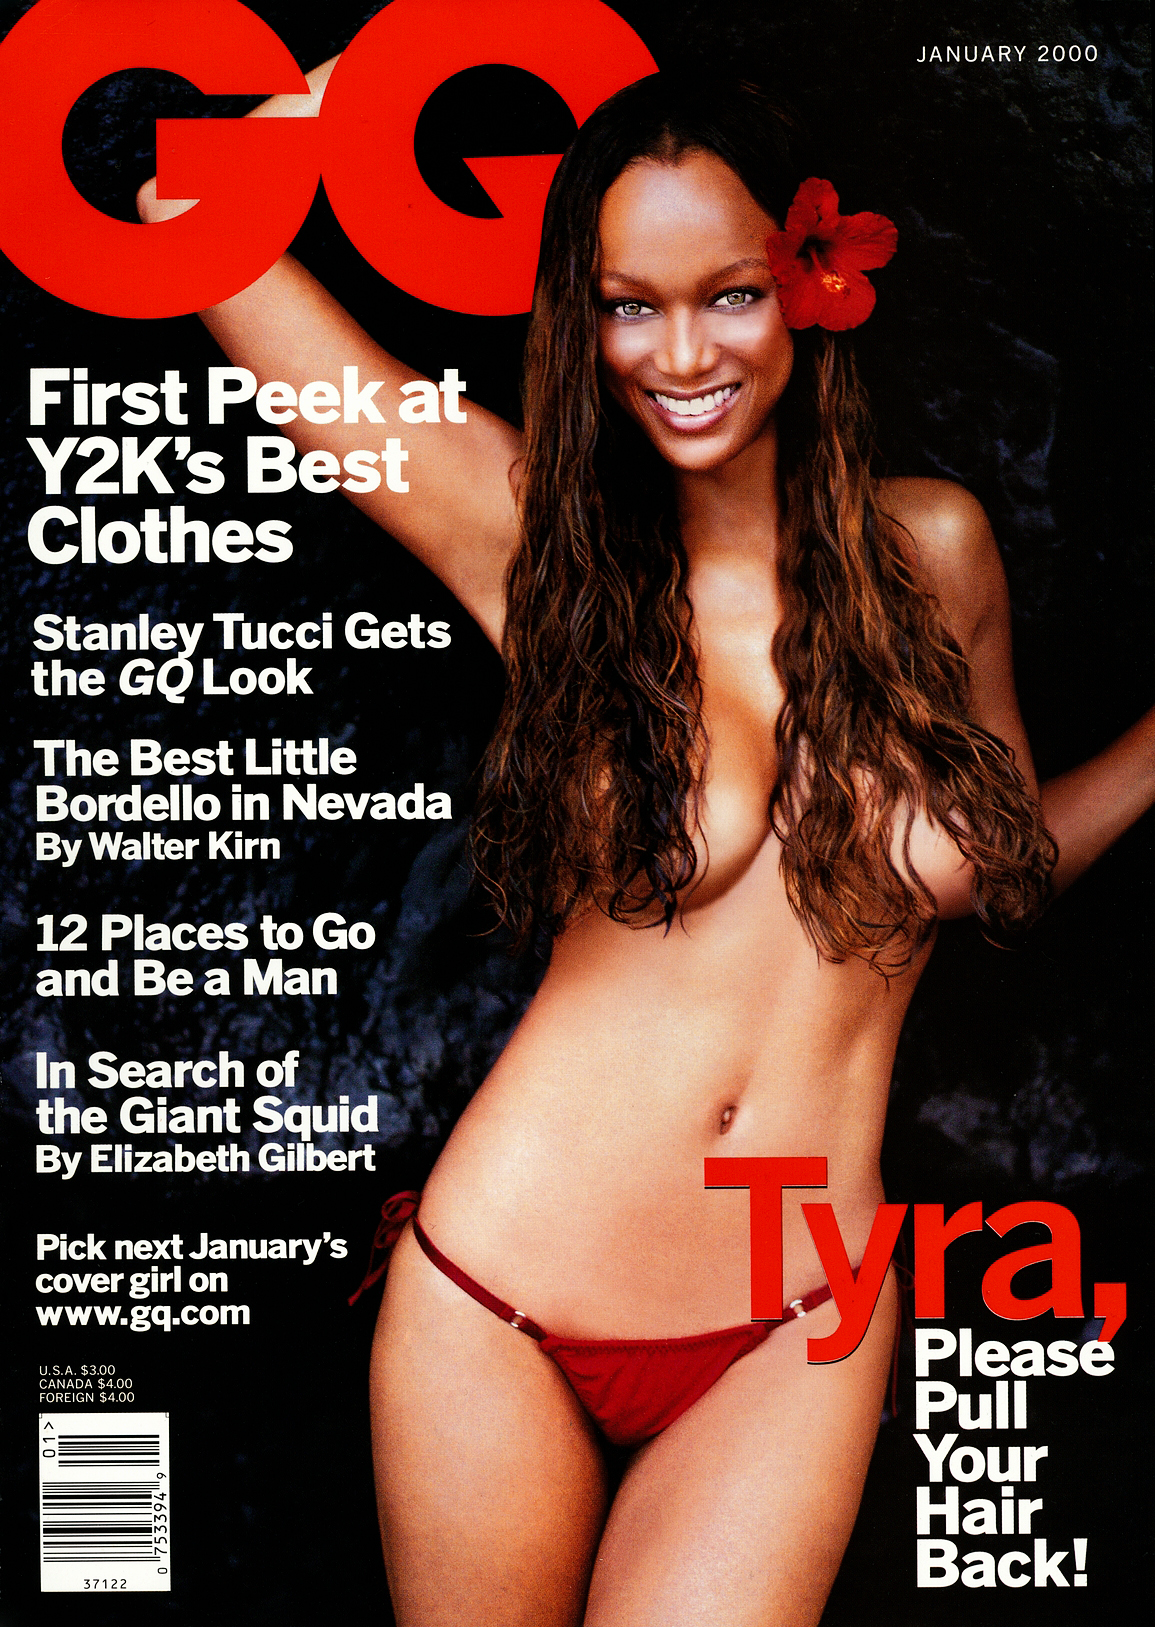 The tyra nude in banks 